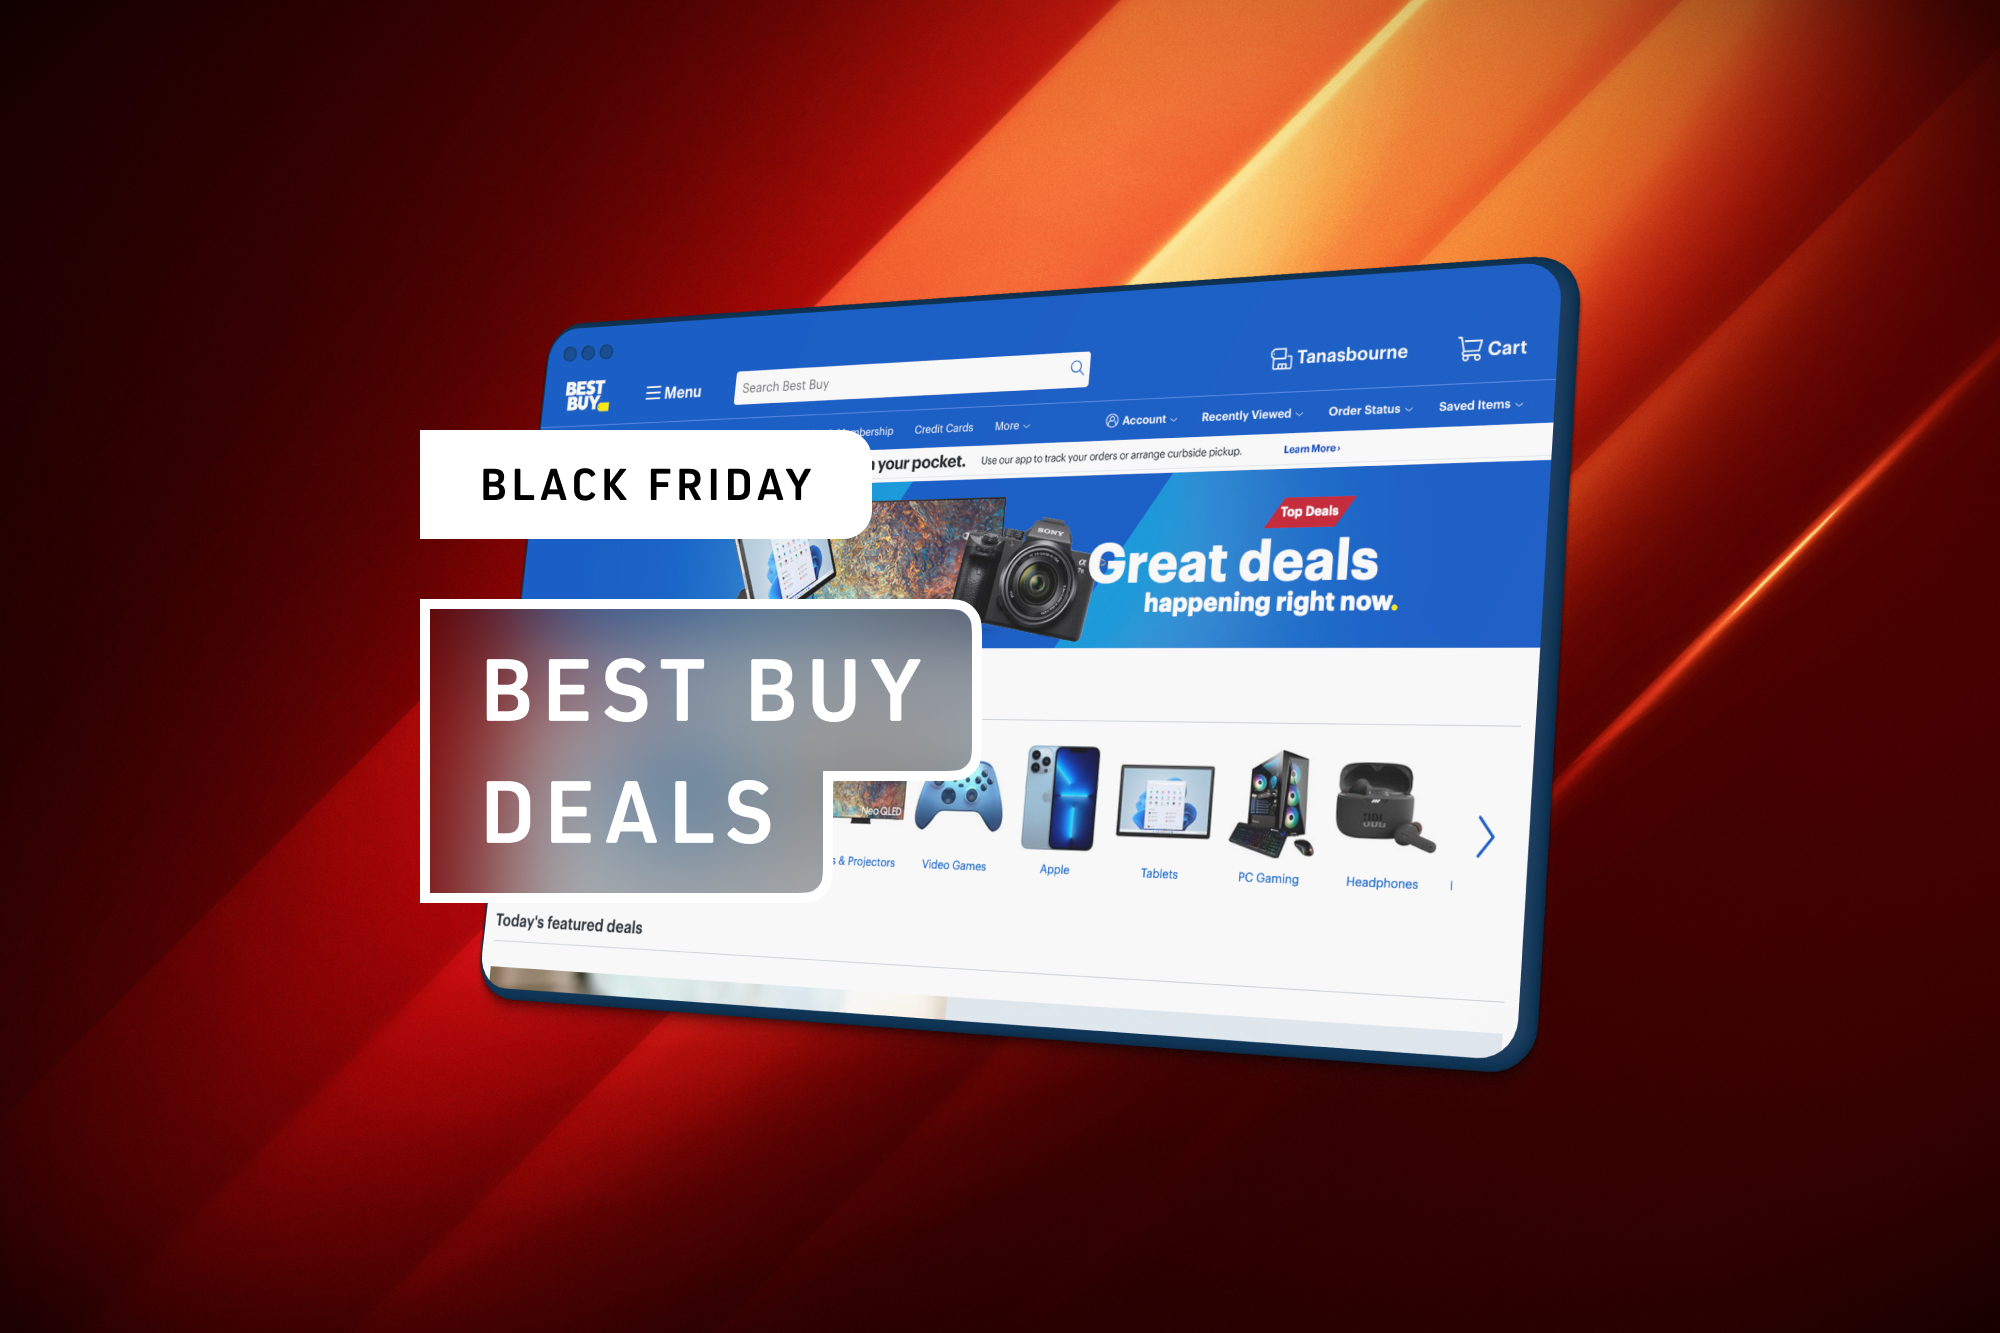 Black Friday: Our best deal ever